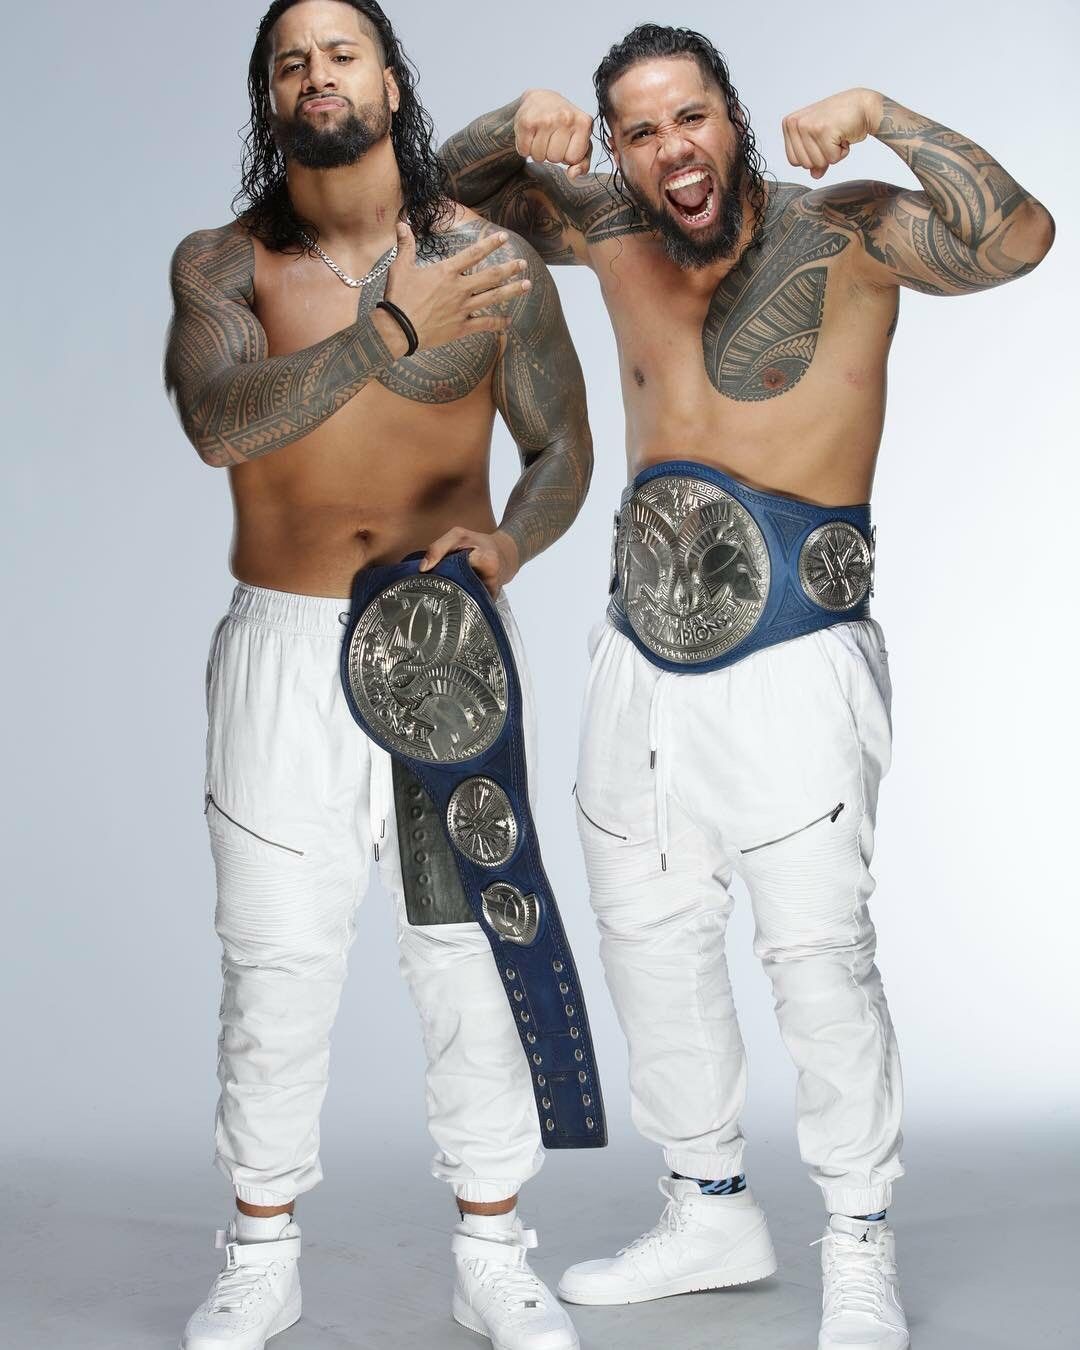 SmackDown Tag Champions The USOS.